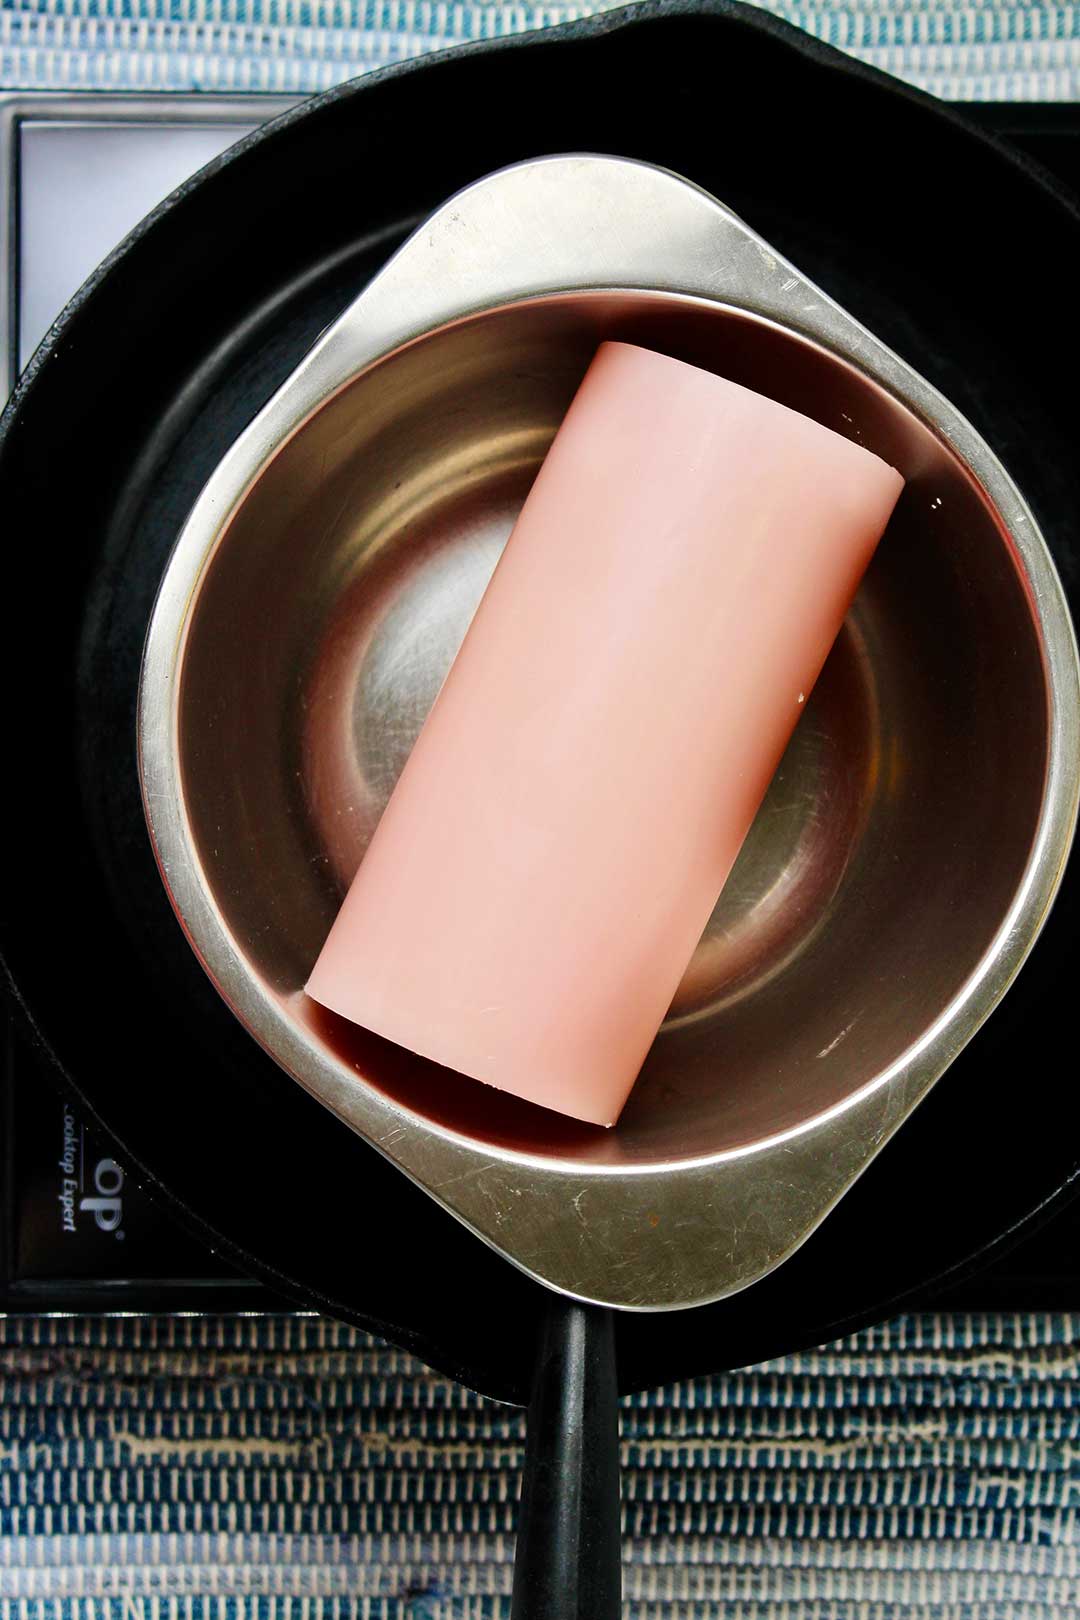 Large pink candle in metal bowl in cast iron pan.